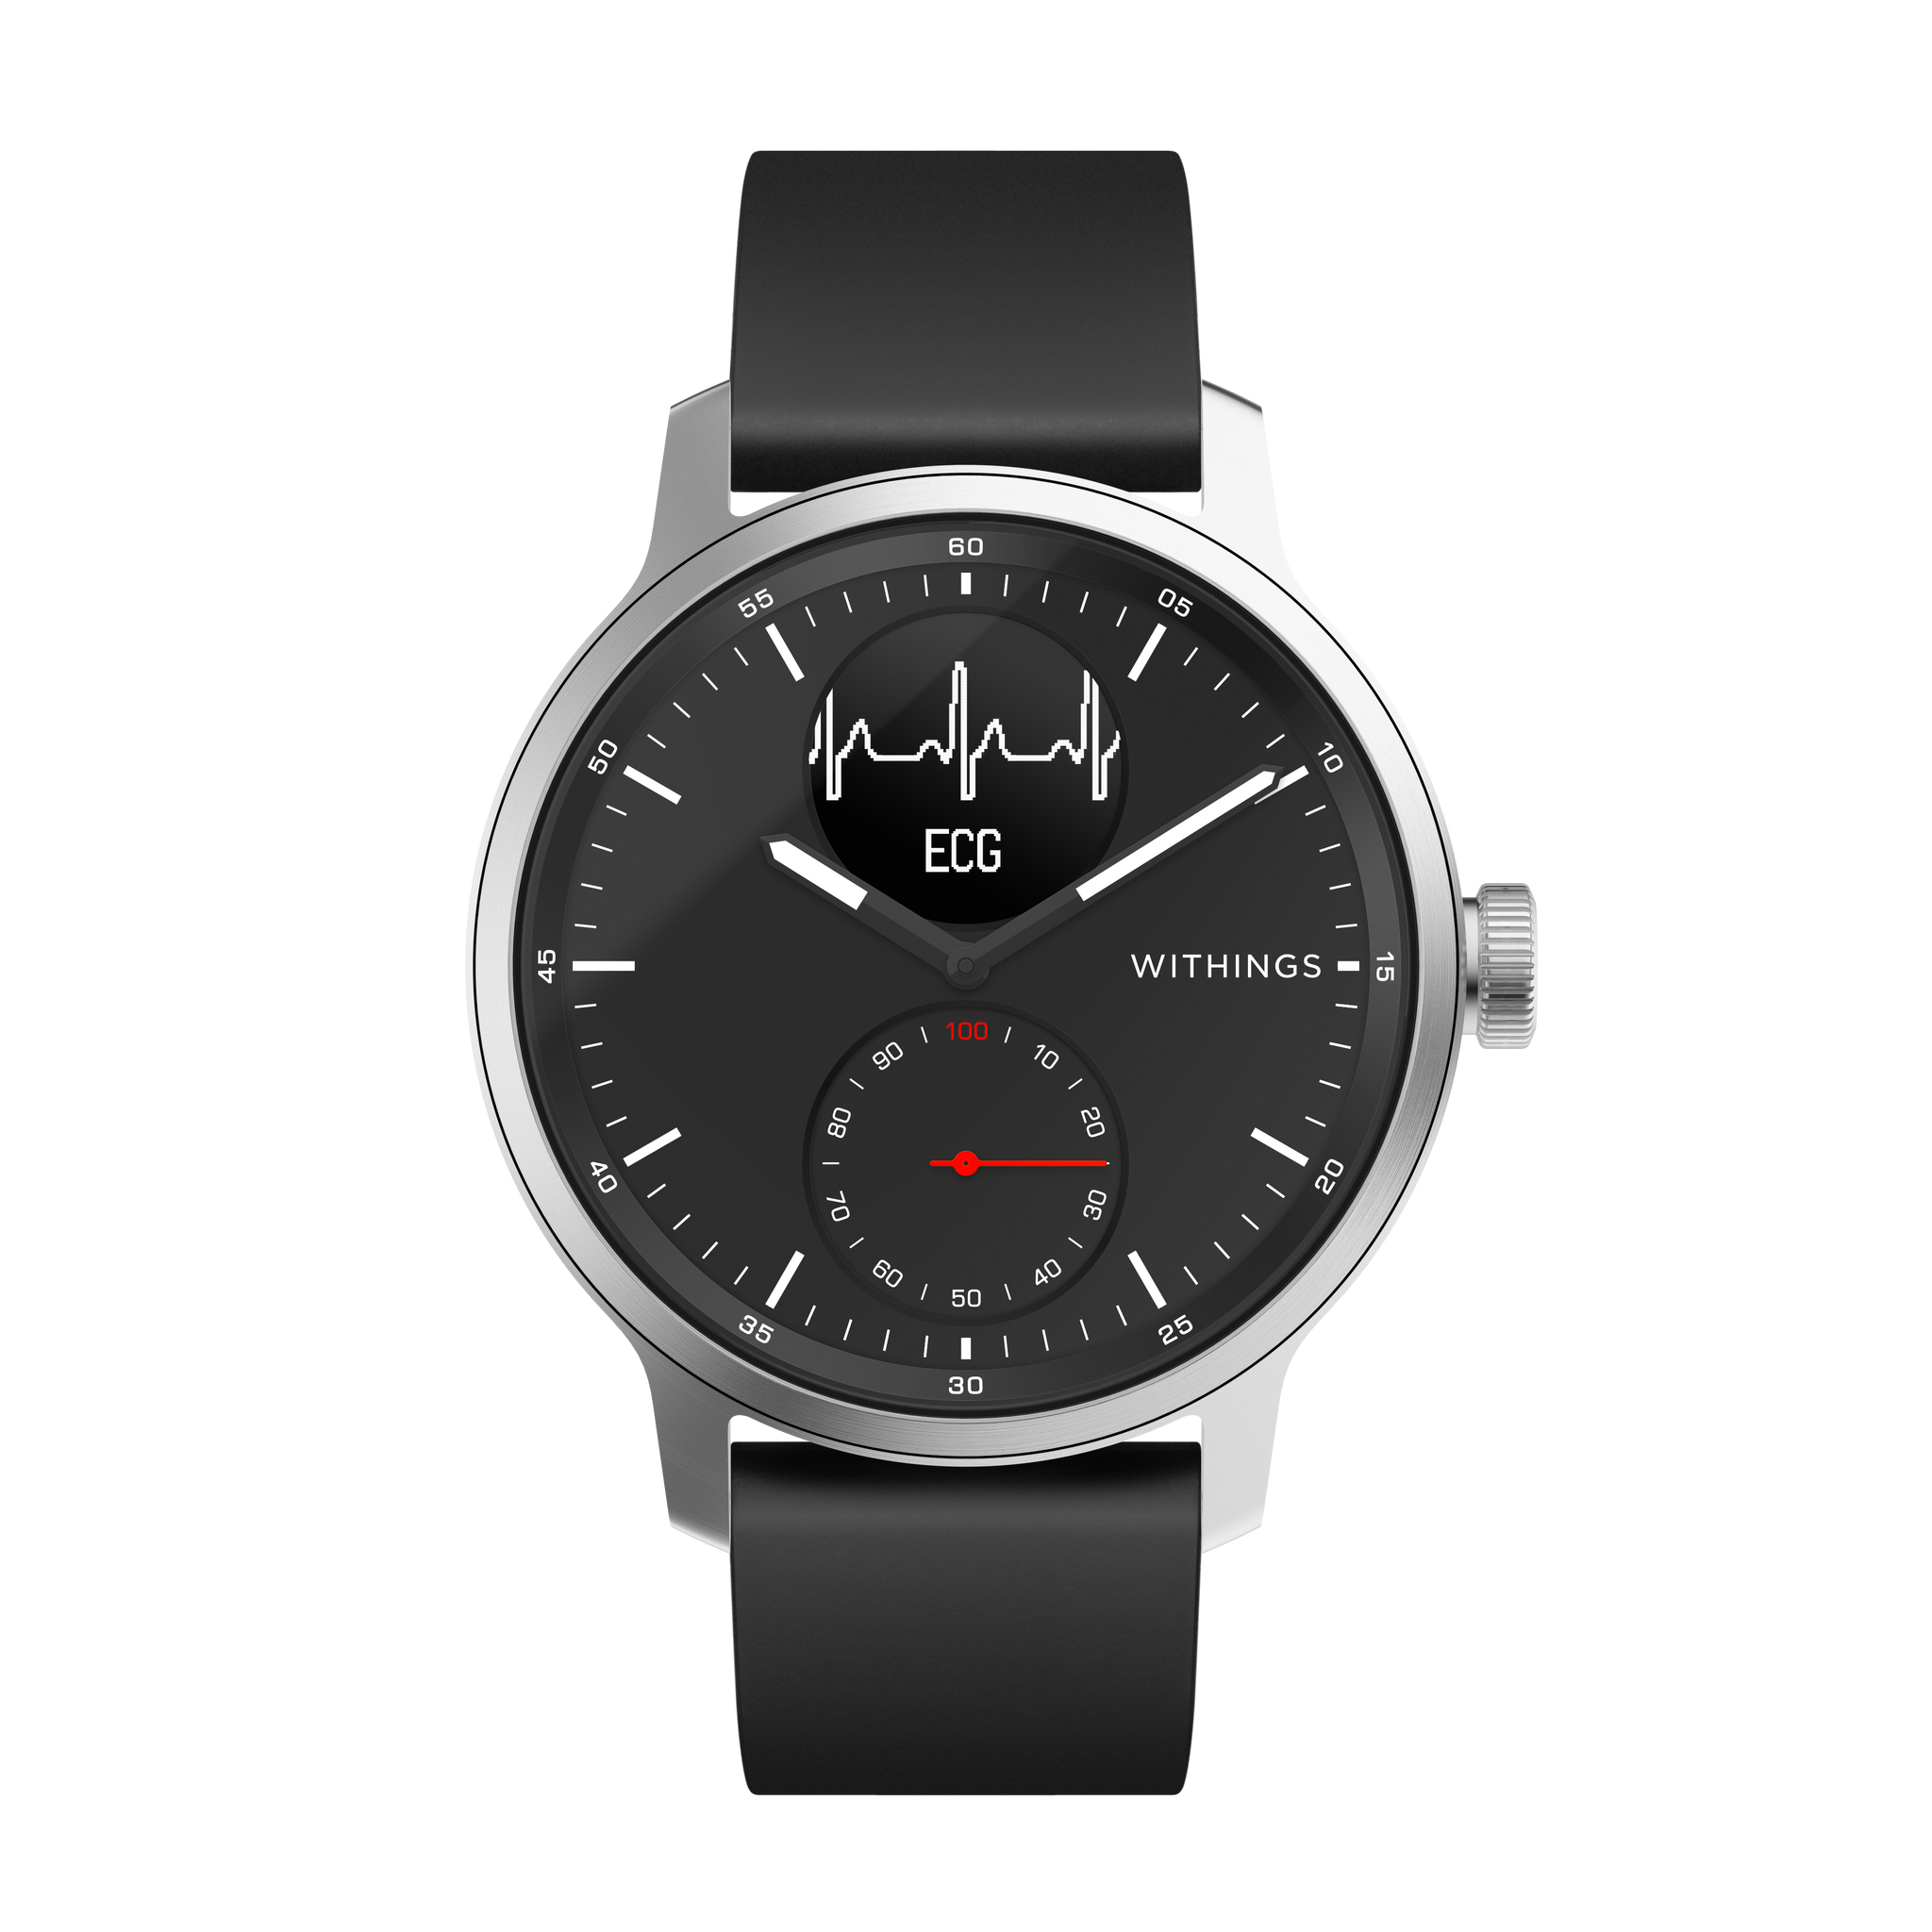 Withings ScanWatch - Hybrid Smartwatch with ECG, Heart Rate & Oximeter (Black 42mm)